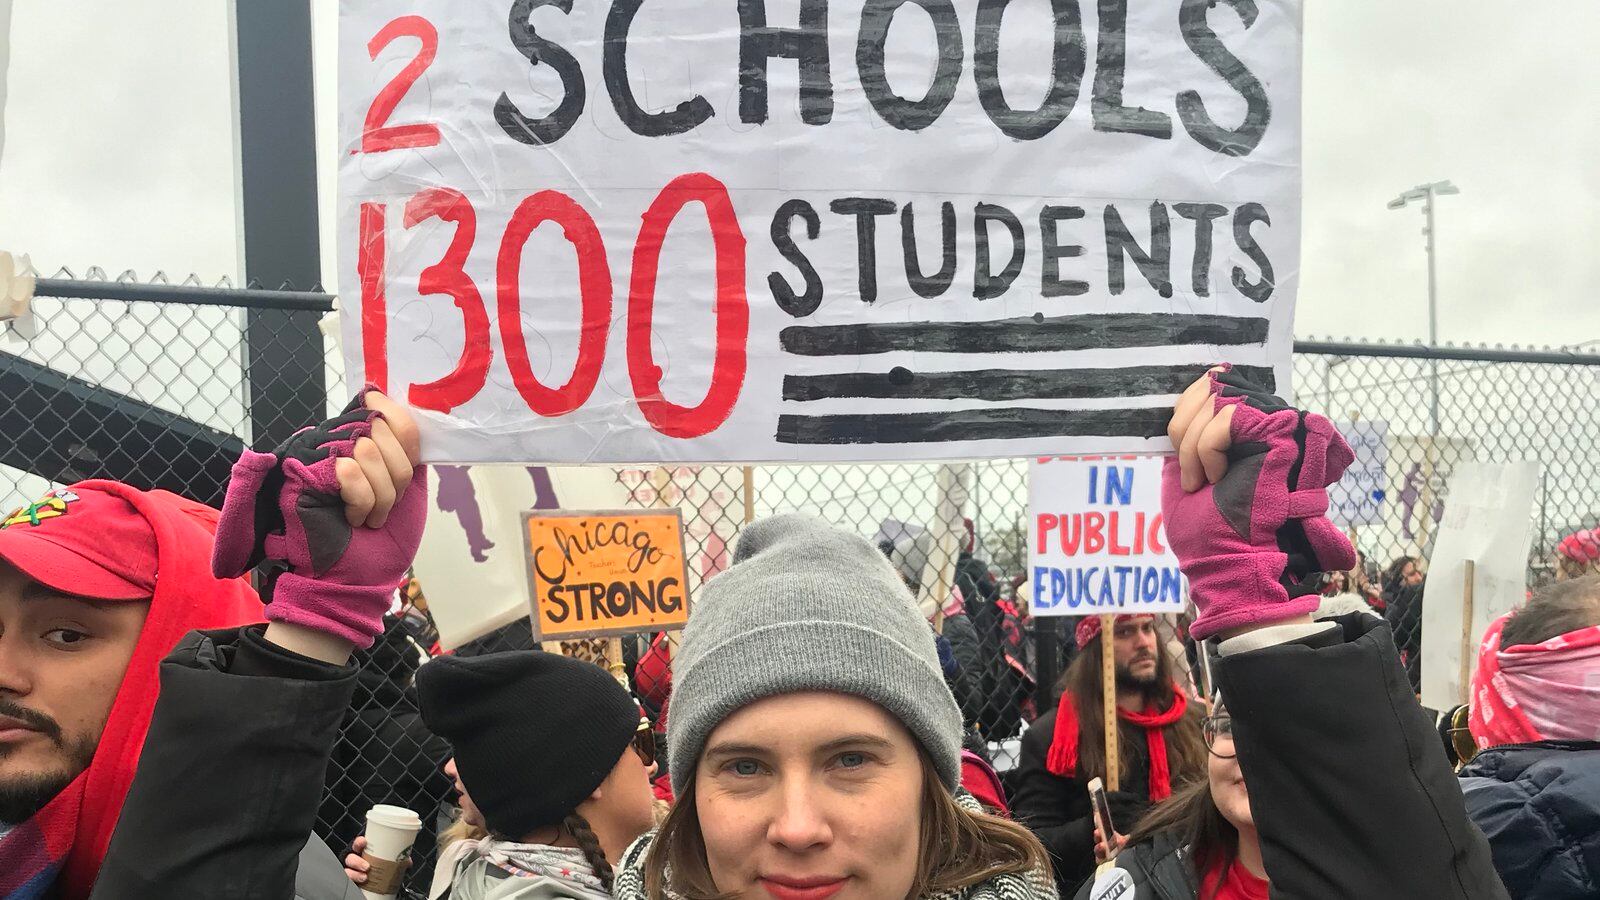 Elizabeth Weiss joined picket lines during the Chicago teachers strike to advocate for school social workers like herself.